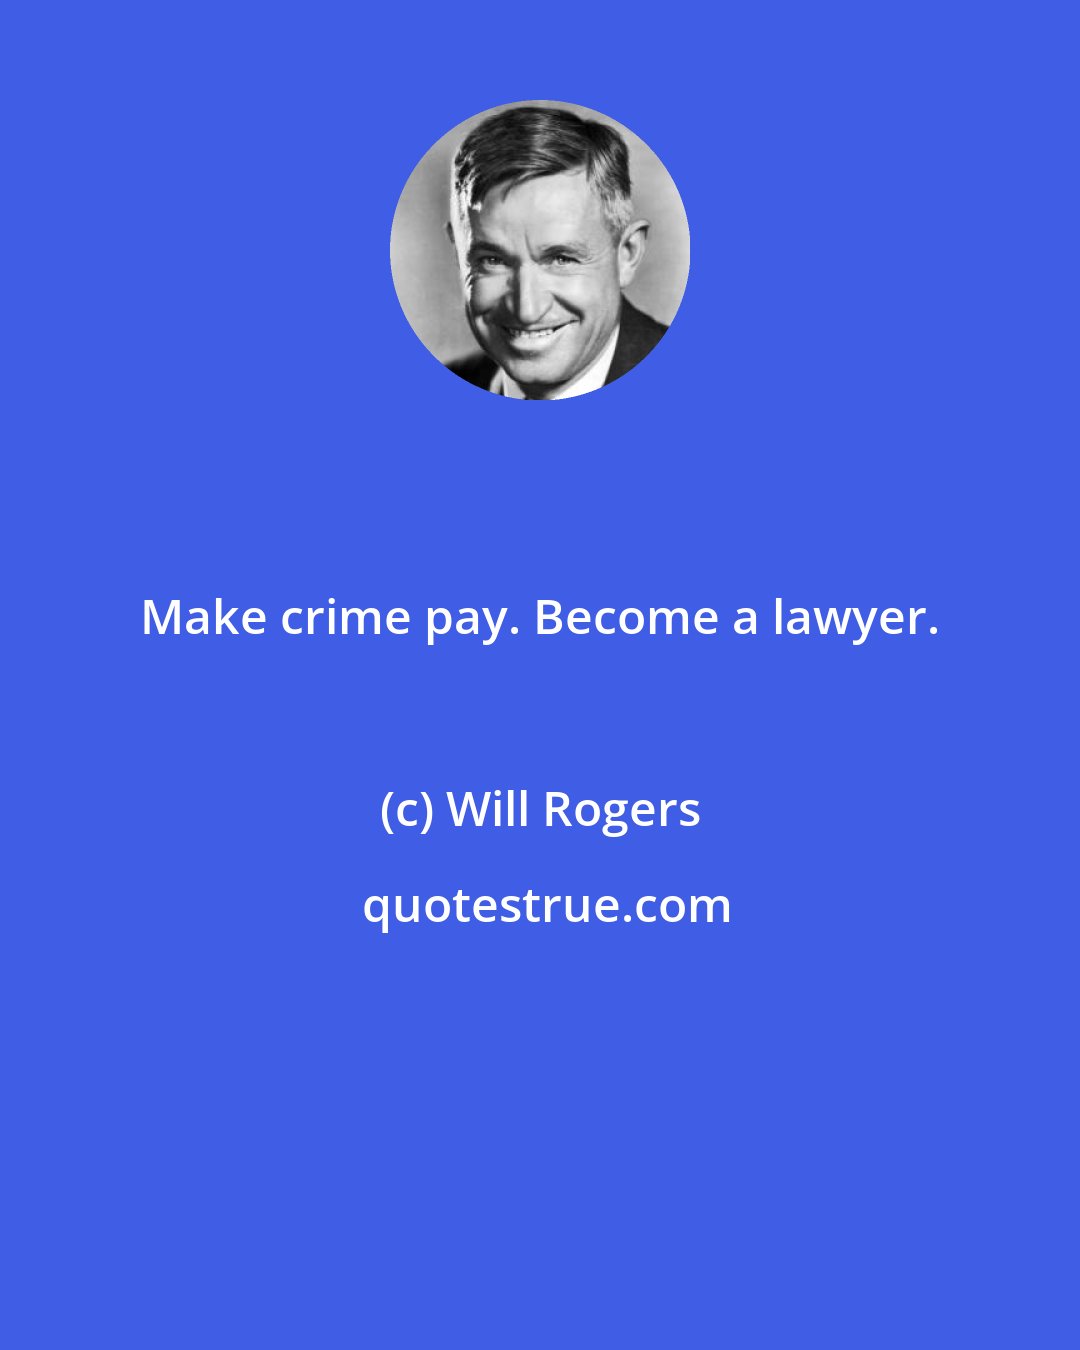 Will Rogers: Make crime pay. Become a lawyer.